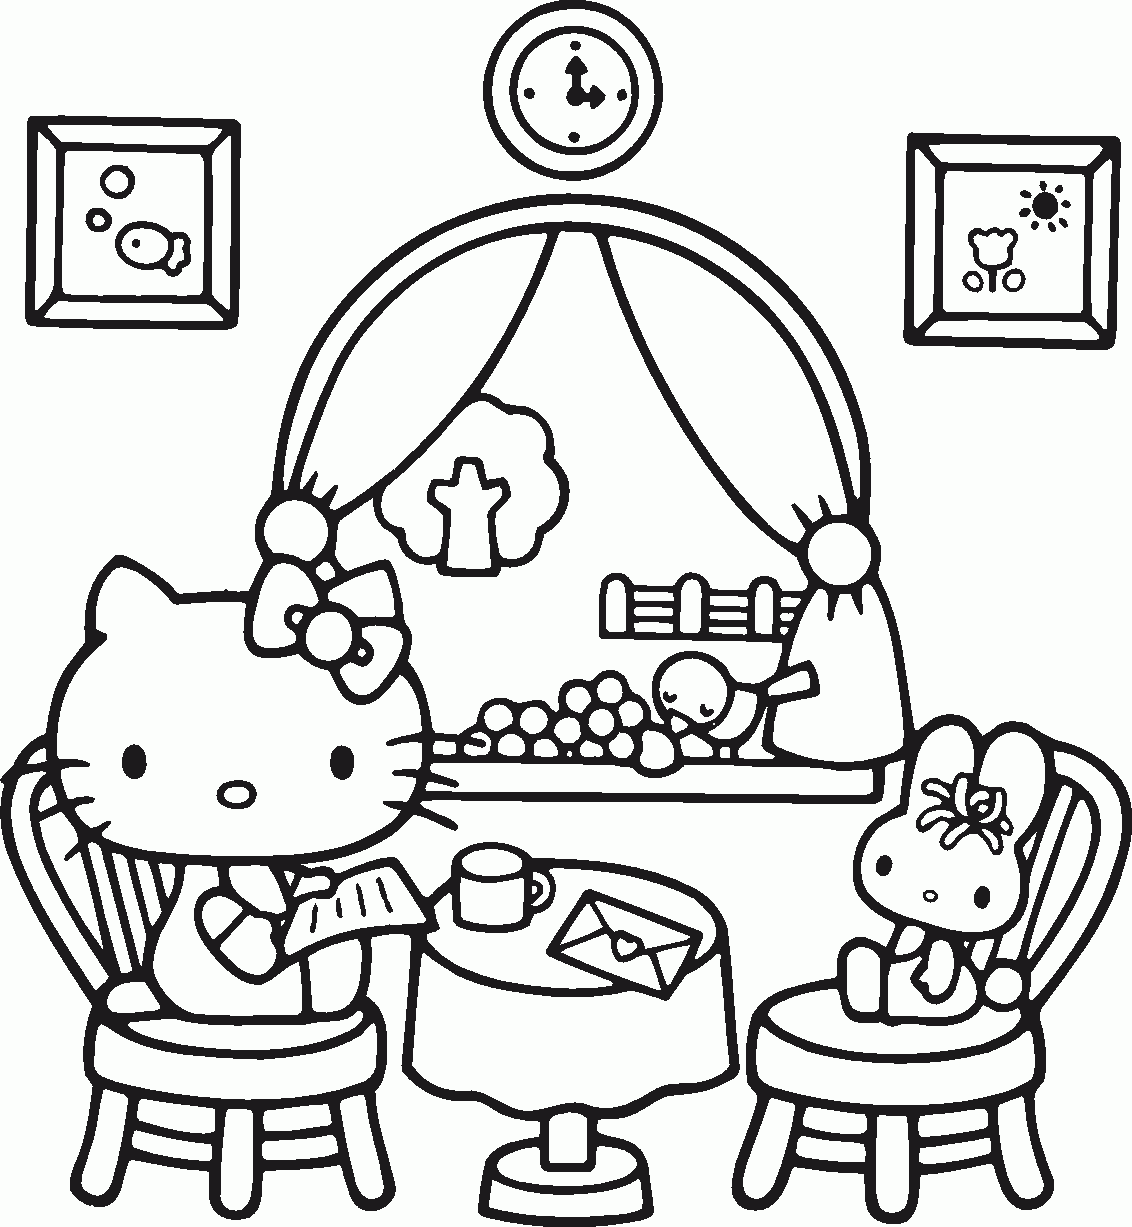 Amazing of Free Coloring Pages For Kids From Free Colori #645